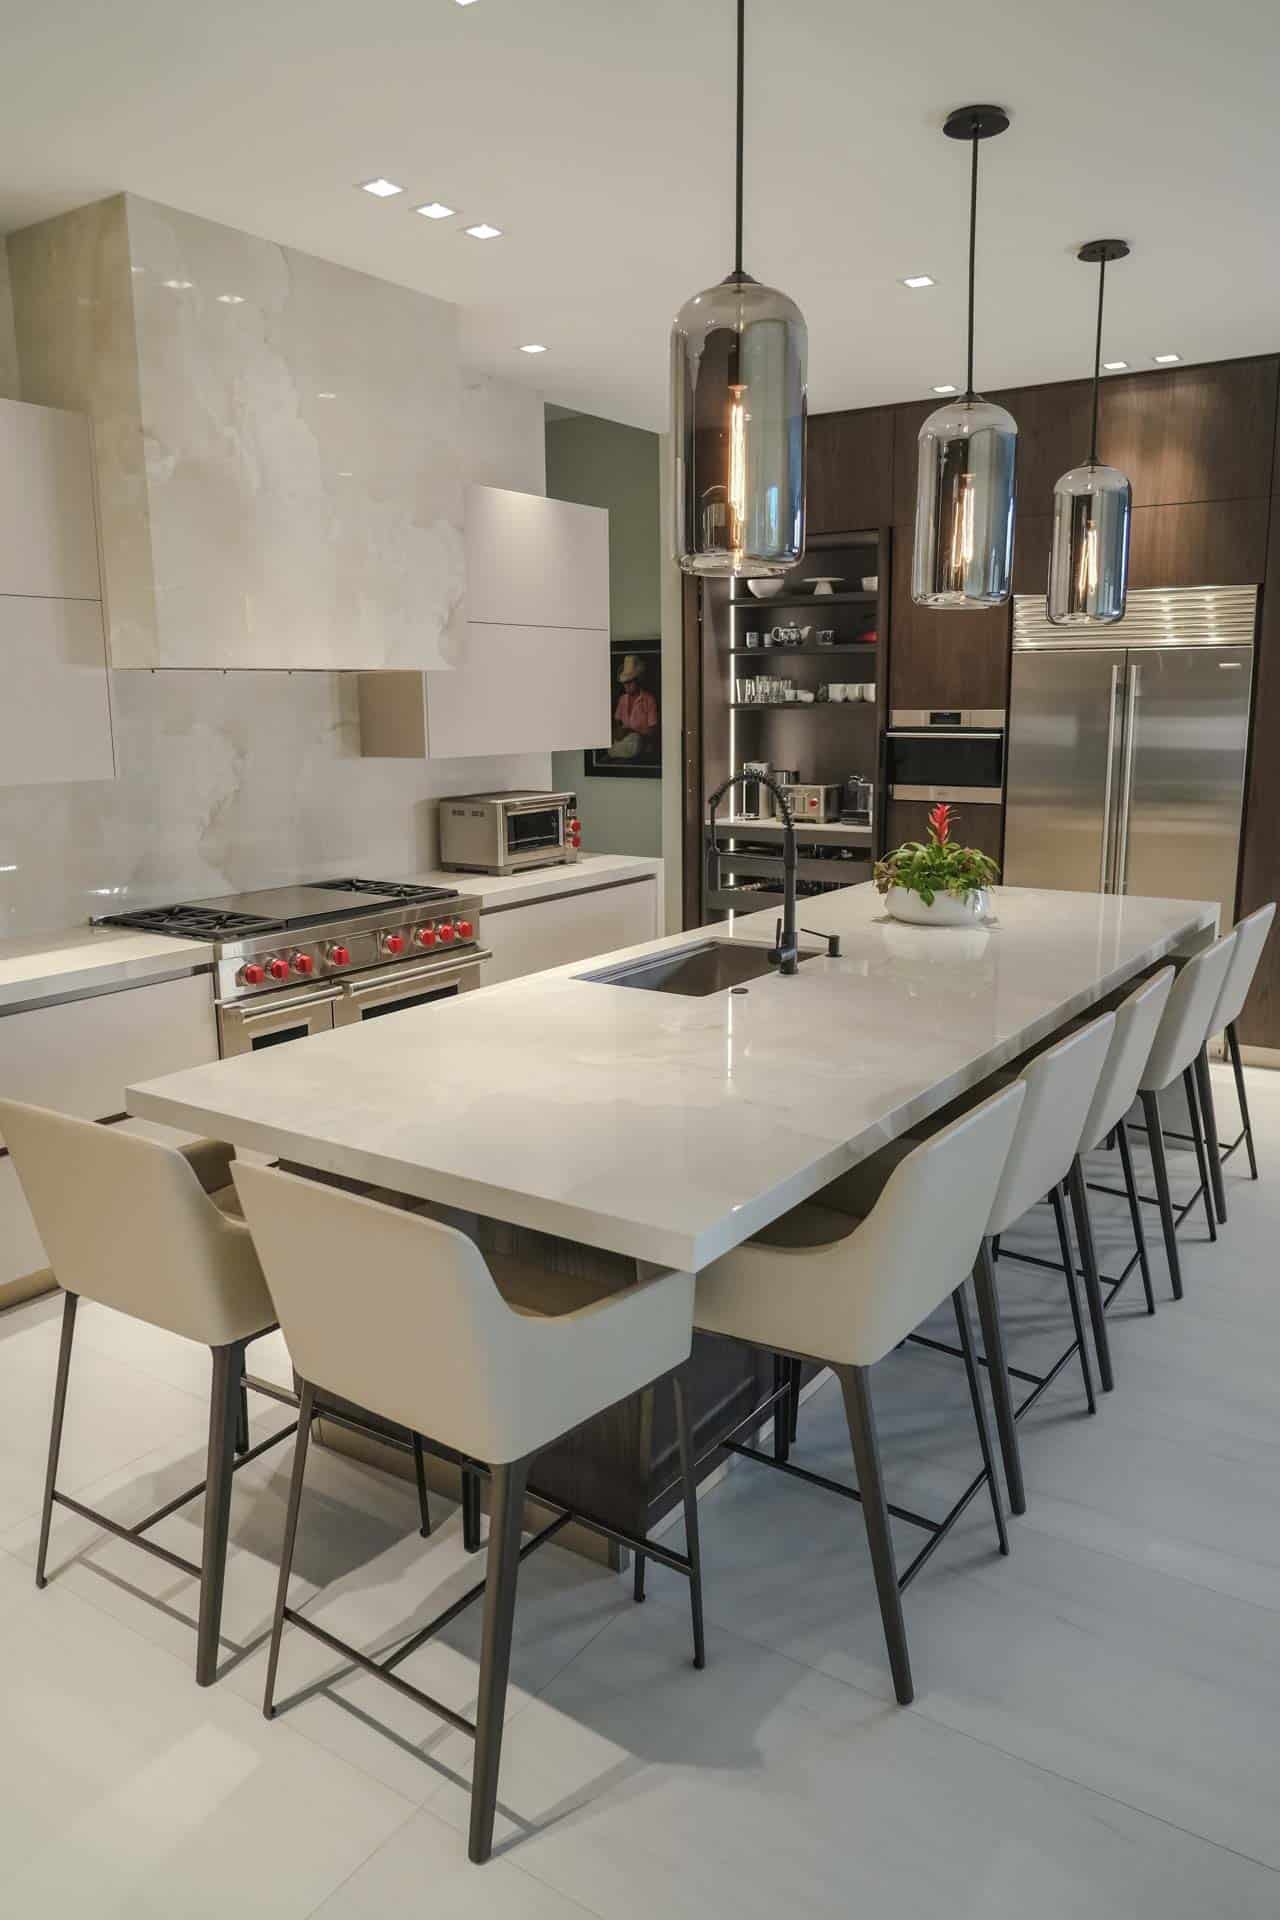 Get Inspired by the Latest Modern Kitchen Designs